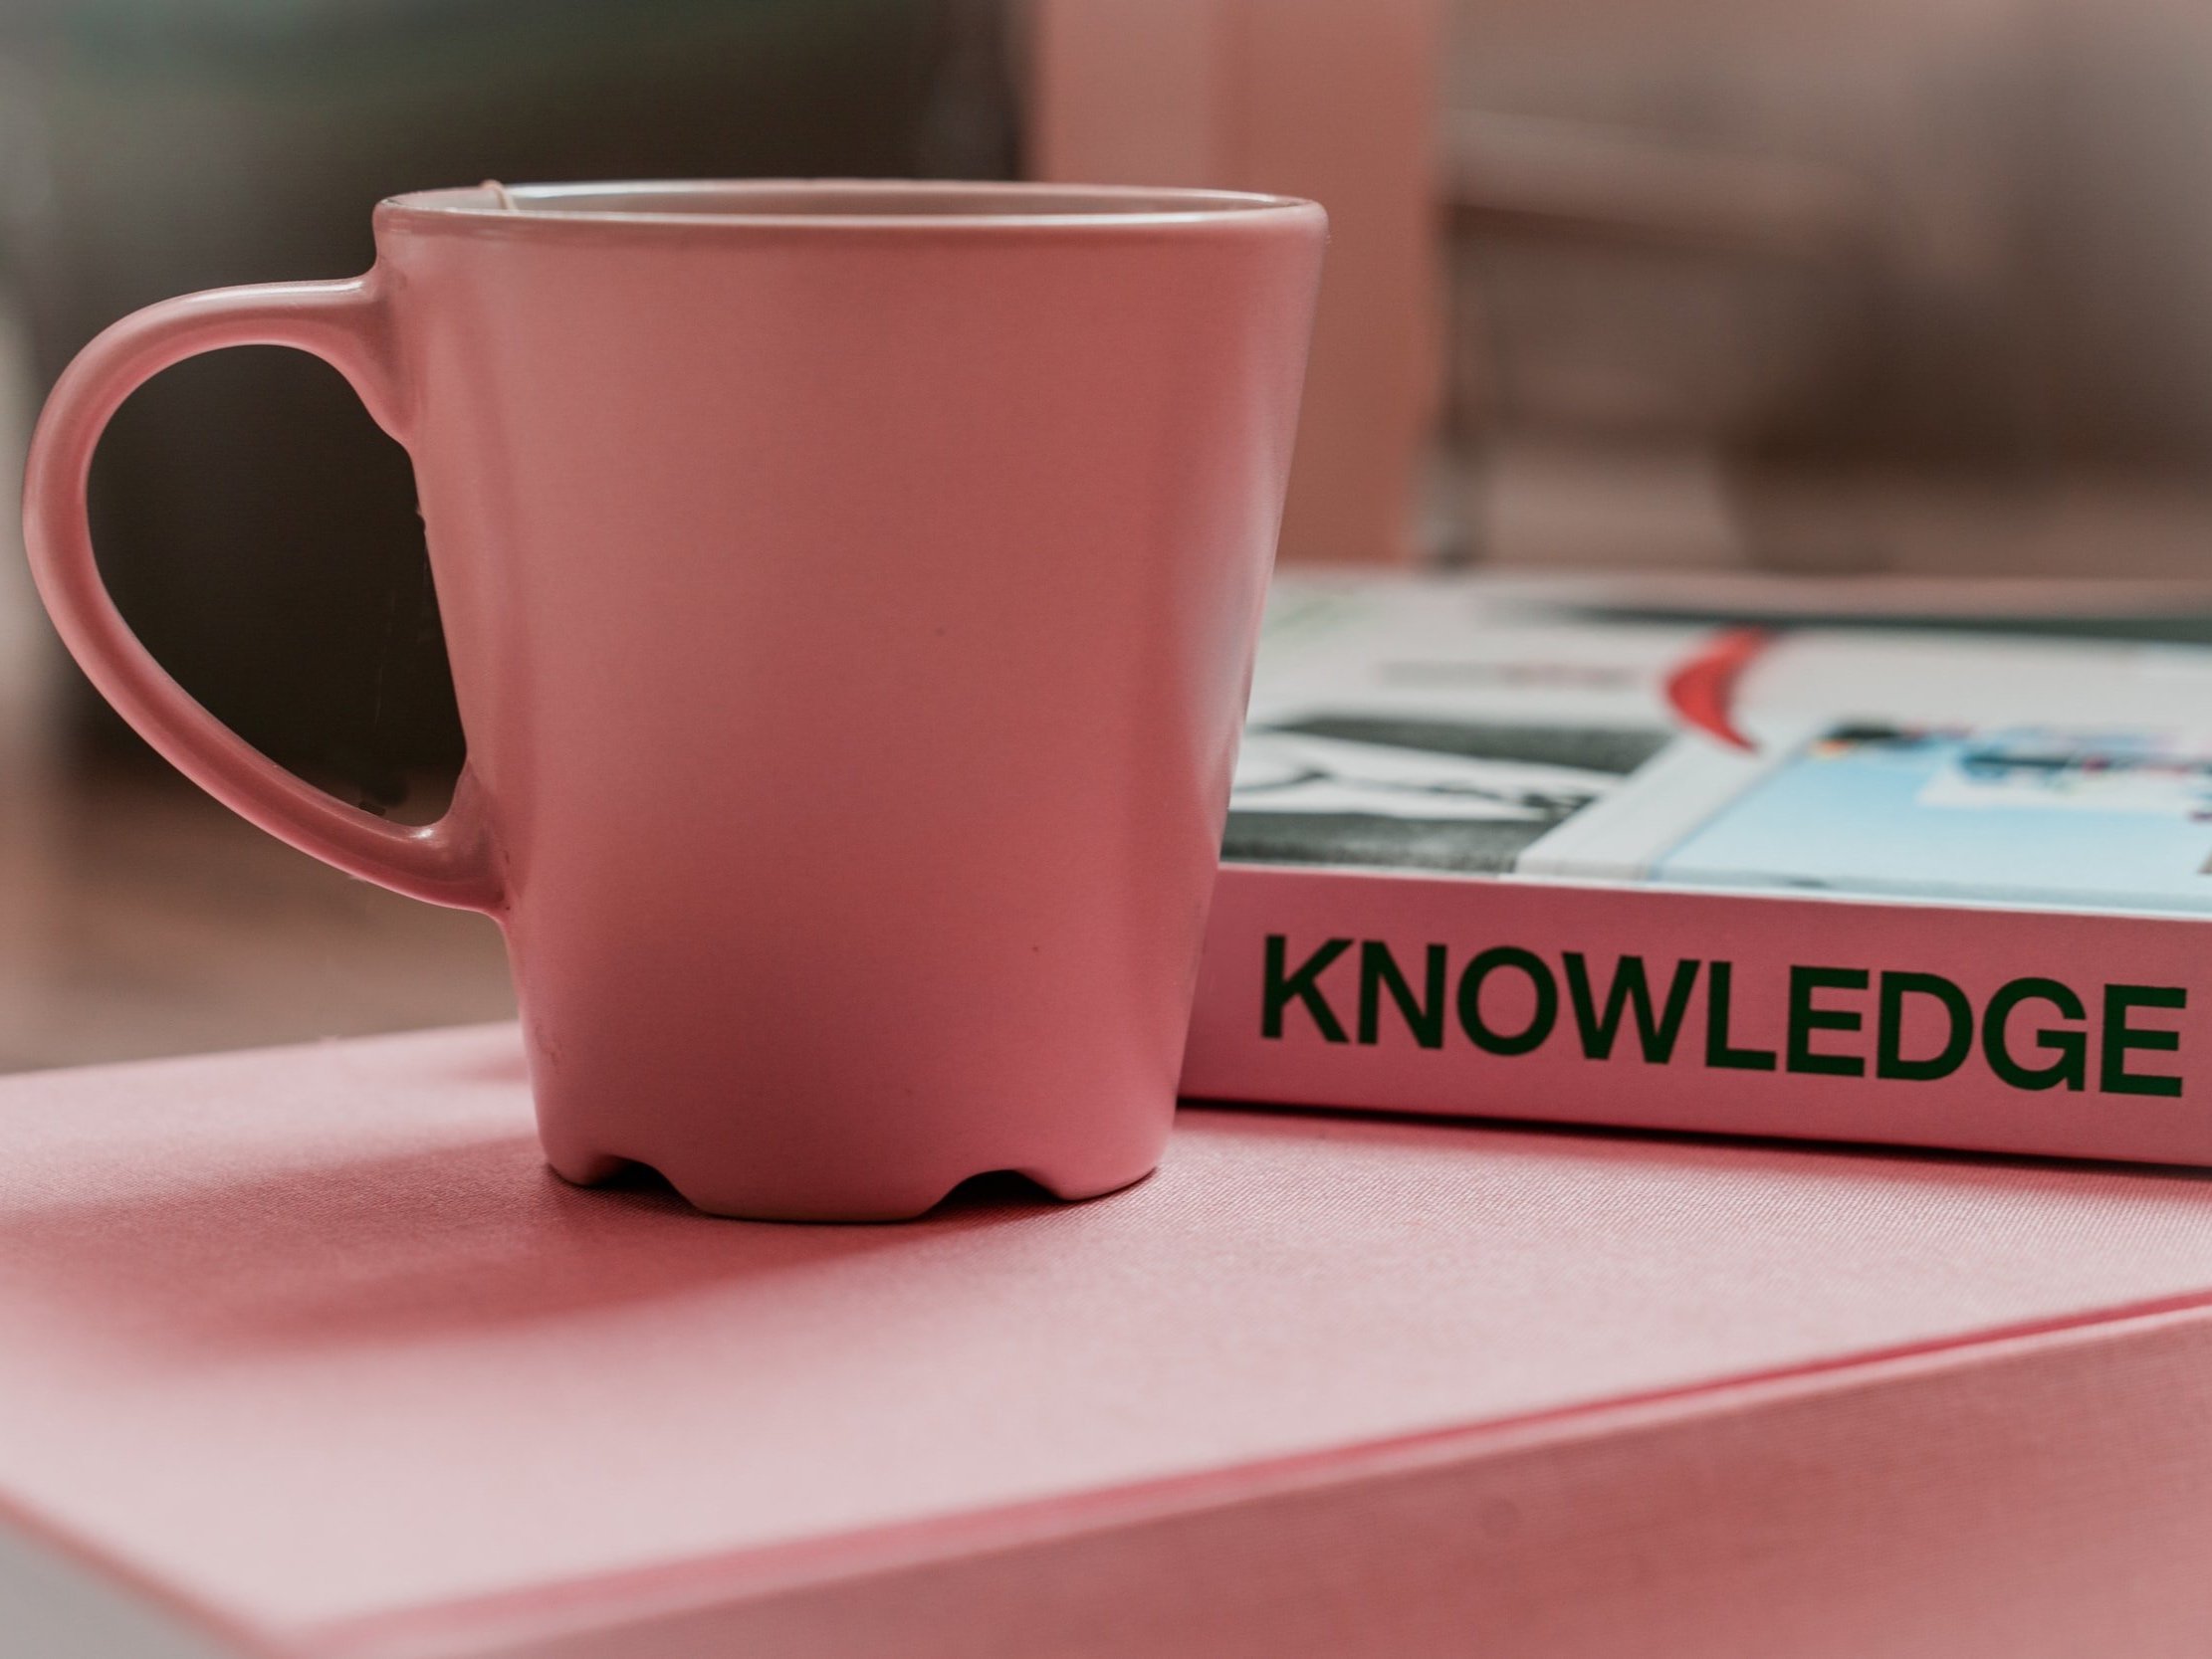 A pink coffee mug sits next to a pink book with the word knowledge written on the spine.